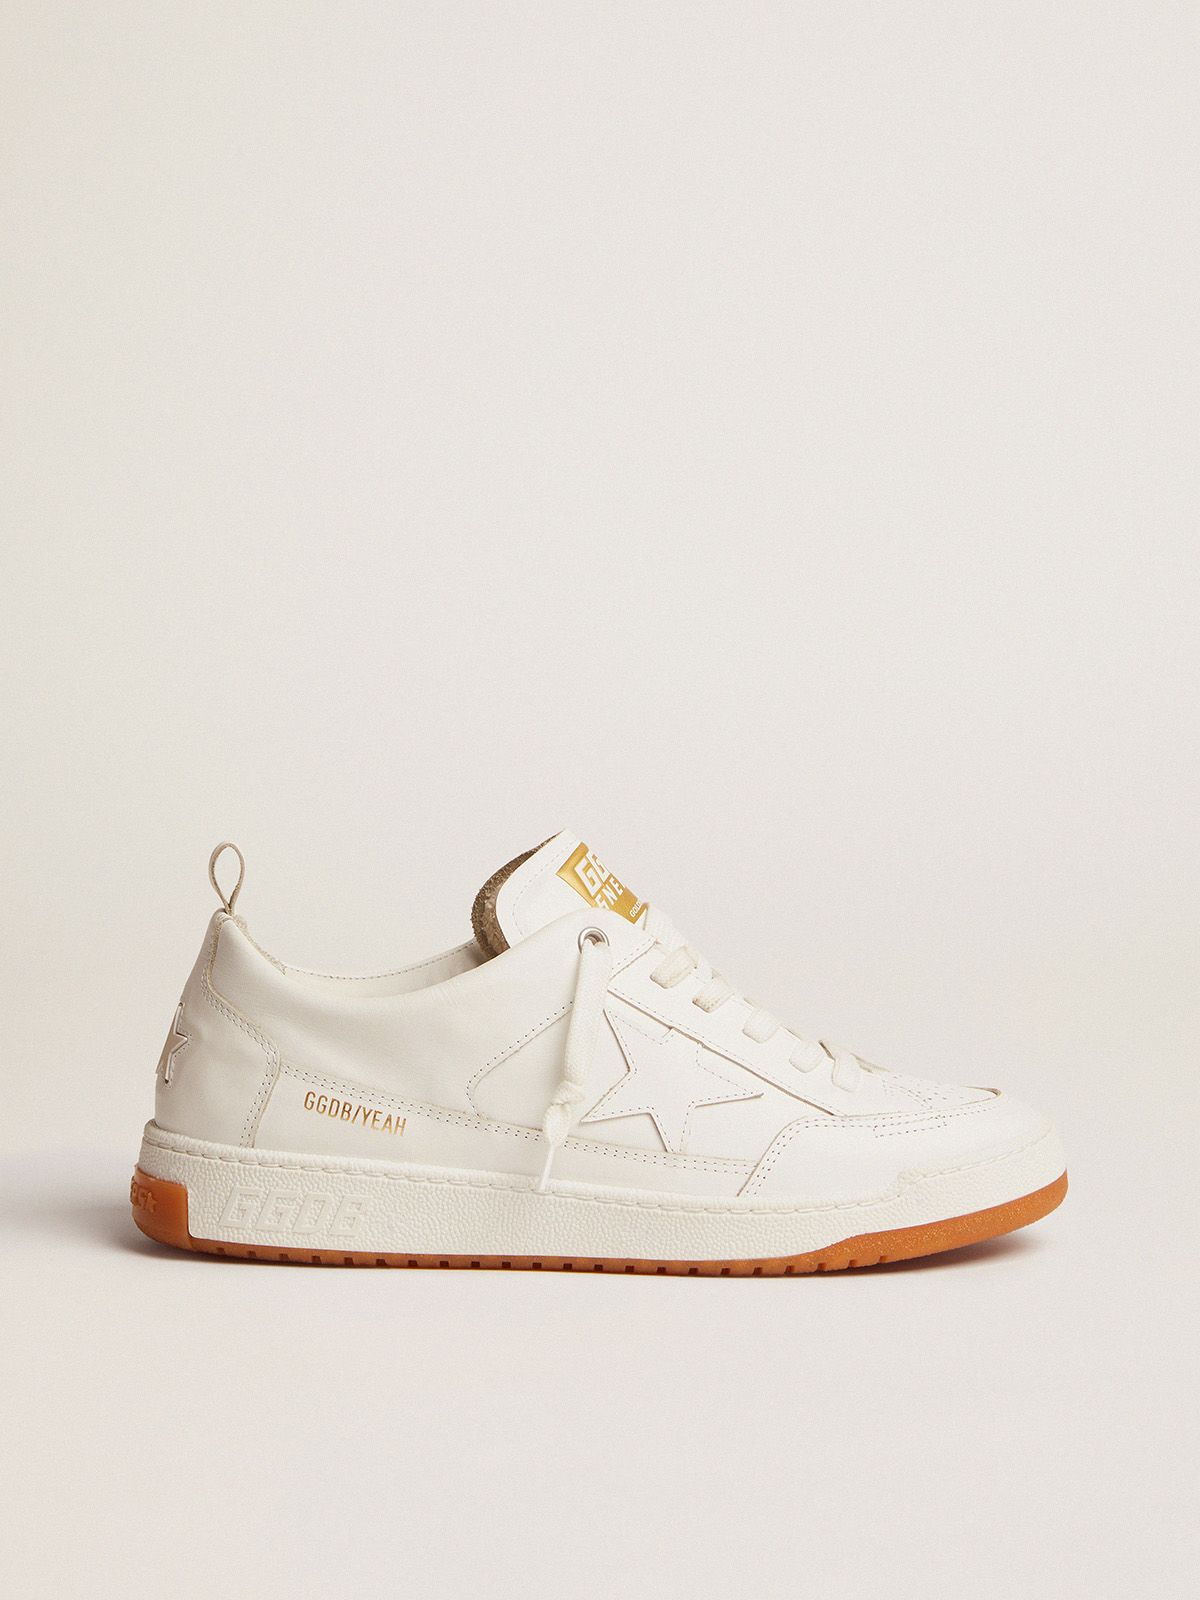 Golden Goose Superstar Yeah sneakers in optical white leather